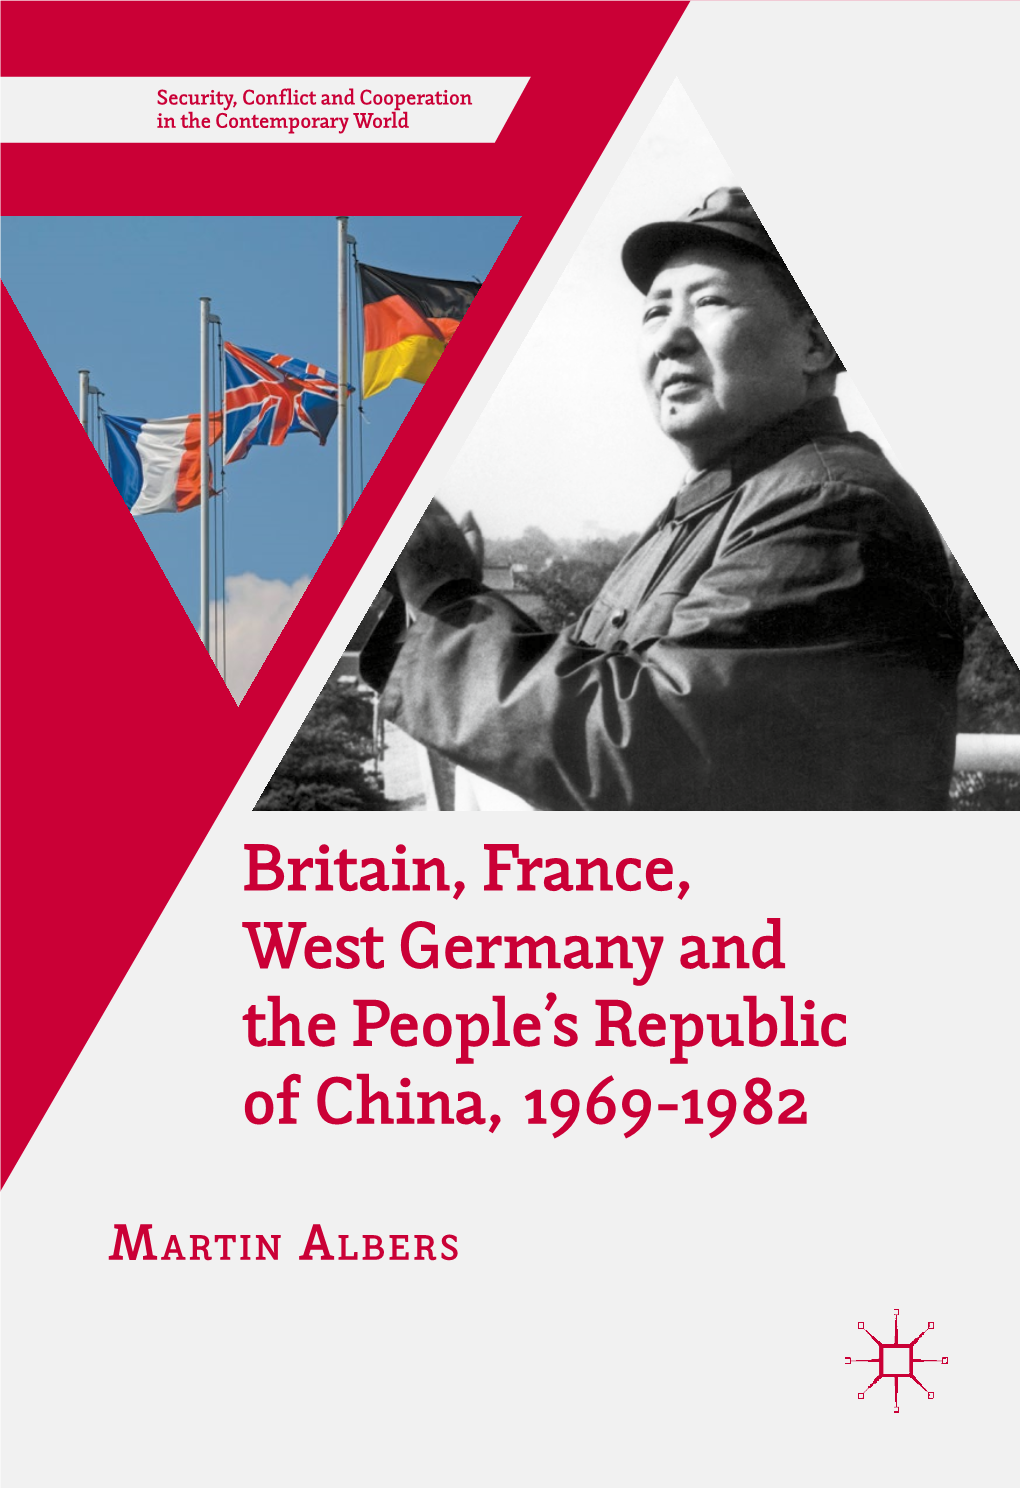 Britain, France, West Germany and the People's Republic of China, 1969